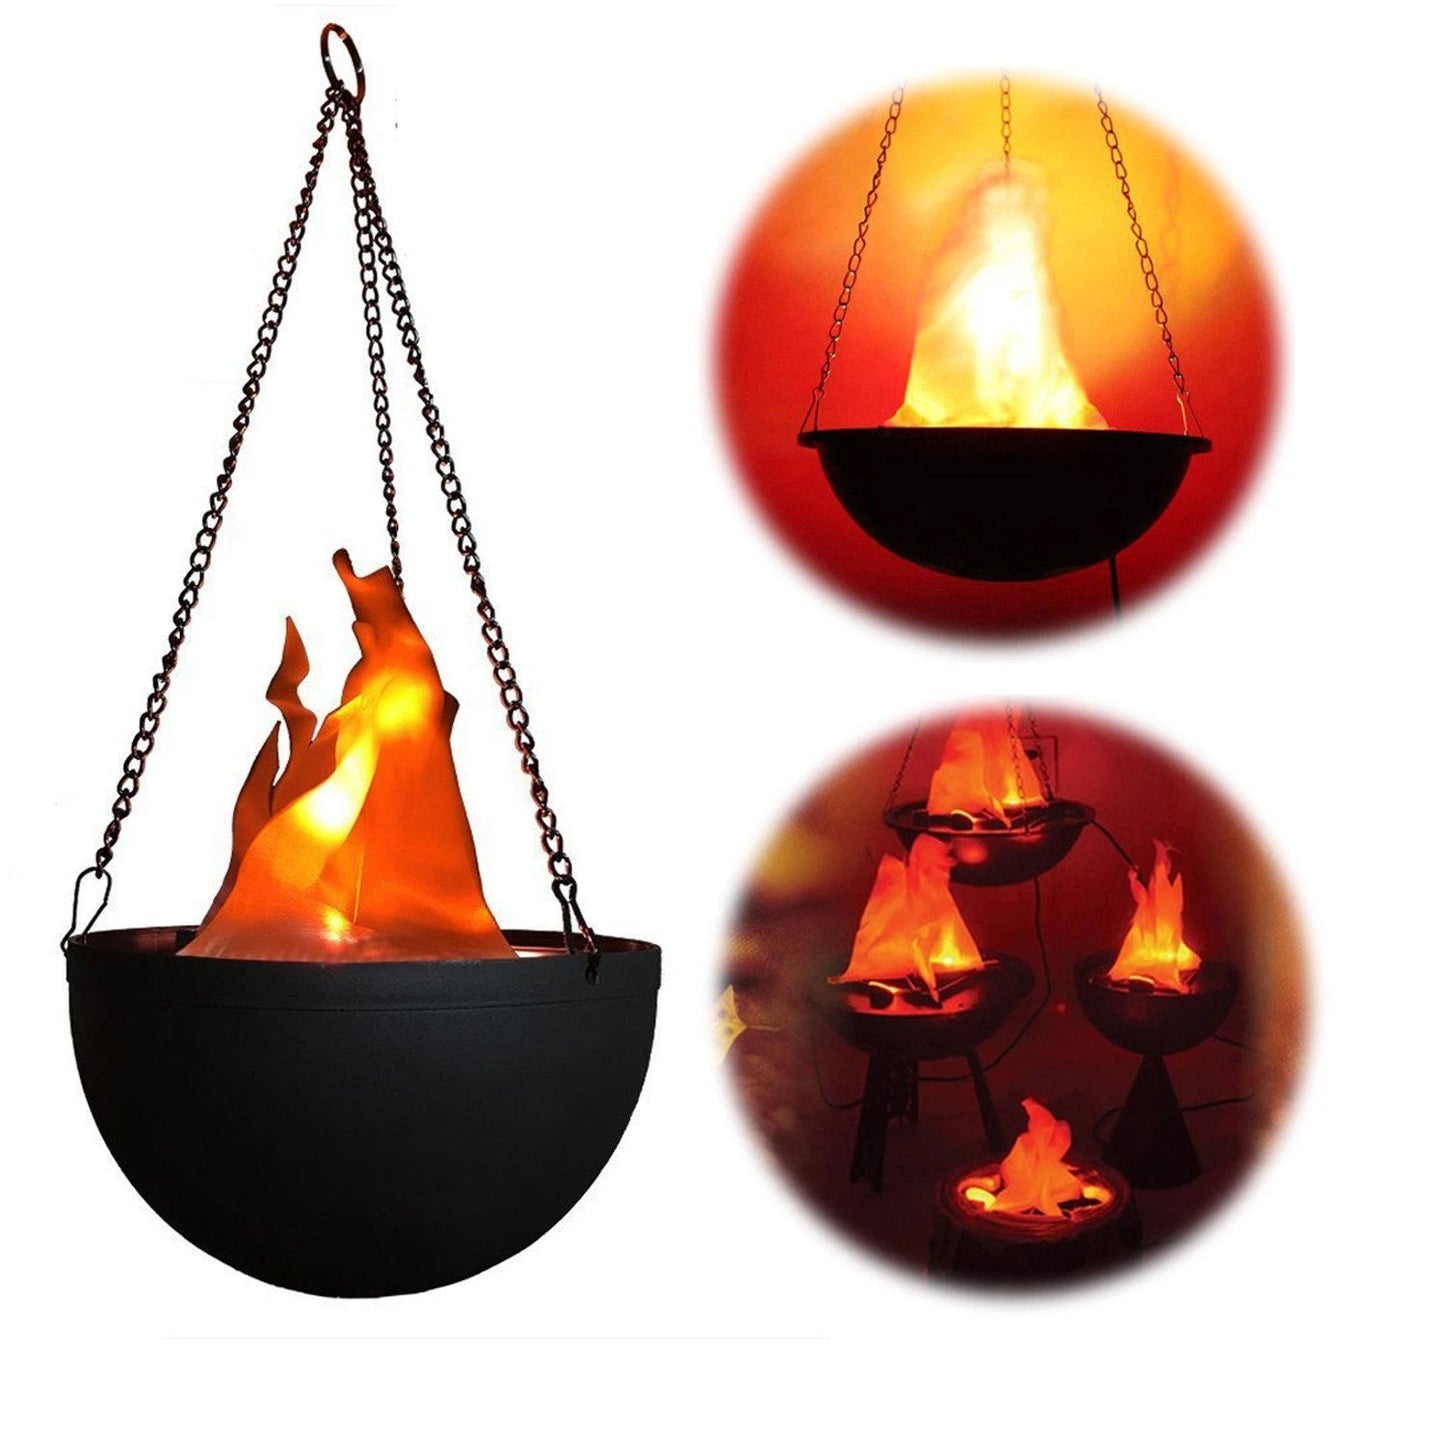 CR Lite 3D Hanging Fake Flame Light Artificial LED Silk Lamp Effect Realistic Campfire Lights for Halloween Xmas Party Club Stage Decor